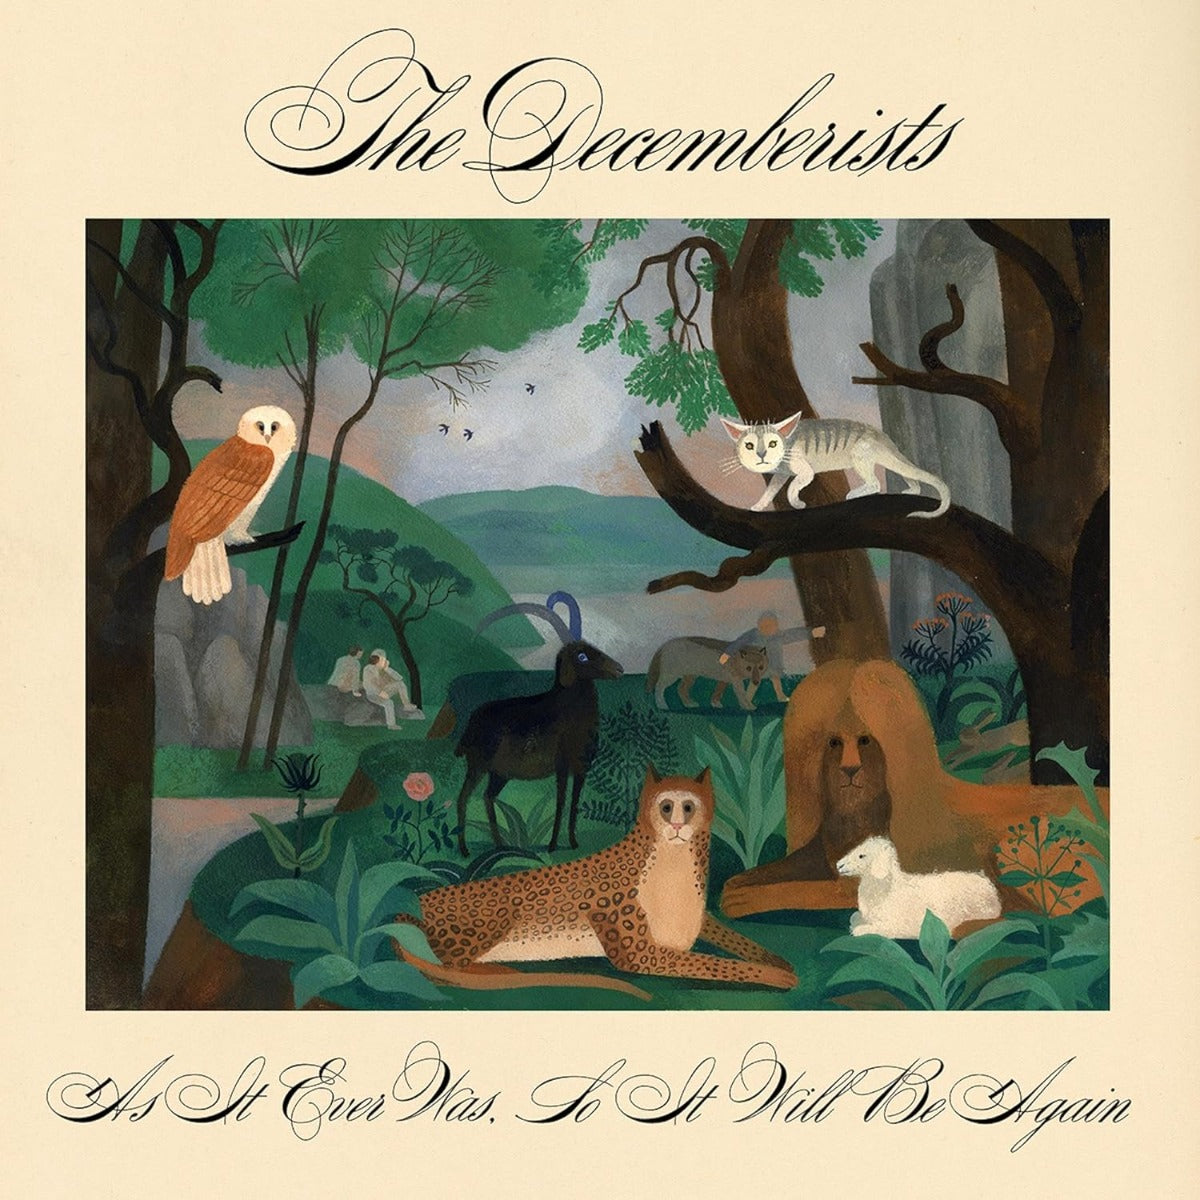 The Decemberists | As It Ever Was, So It Will Be Again (Indie Exclusive, Fruit Punch Colored Vinyl) (2 Lp's) | Vinyl